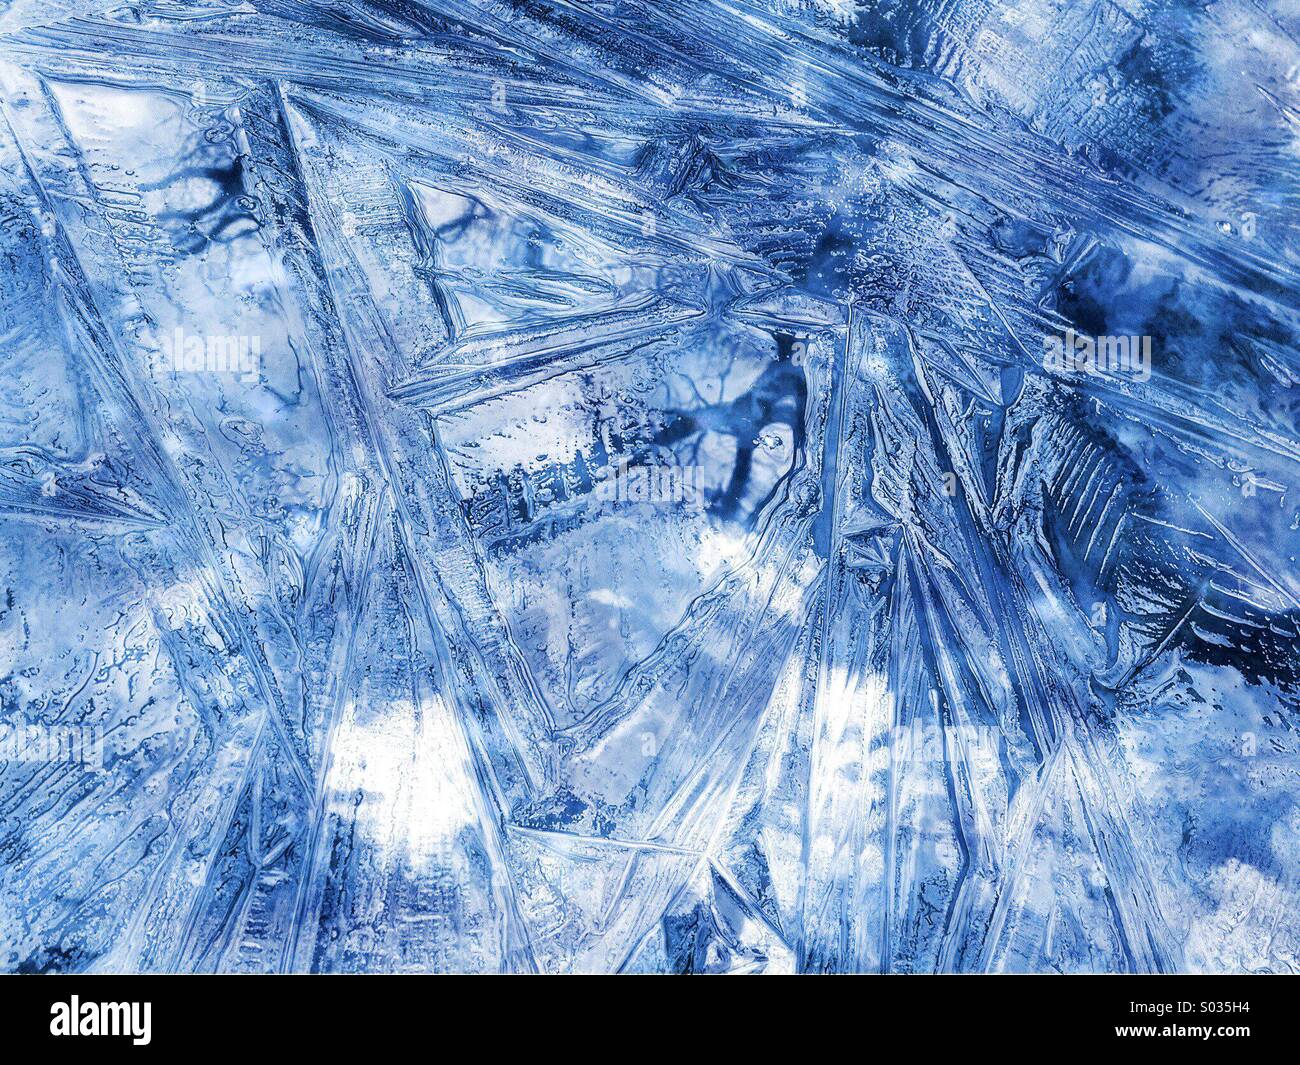 Ice crystal pattern on a freezing pond with blue effect Stock Photo